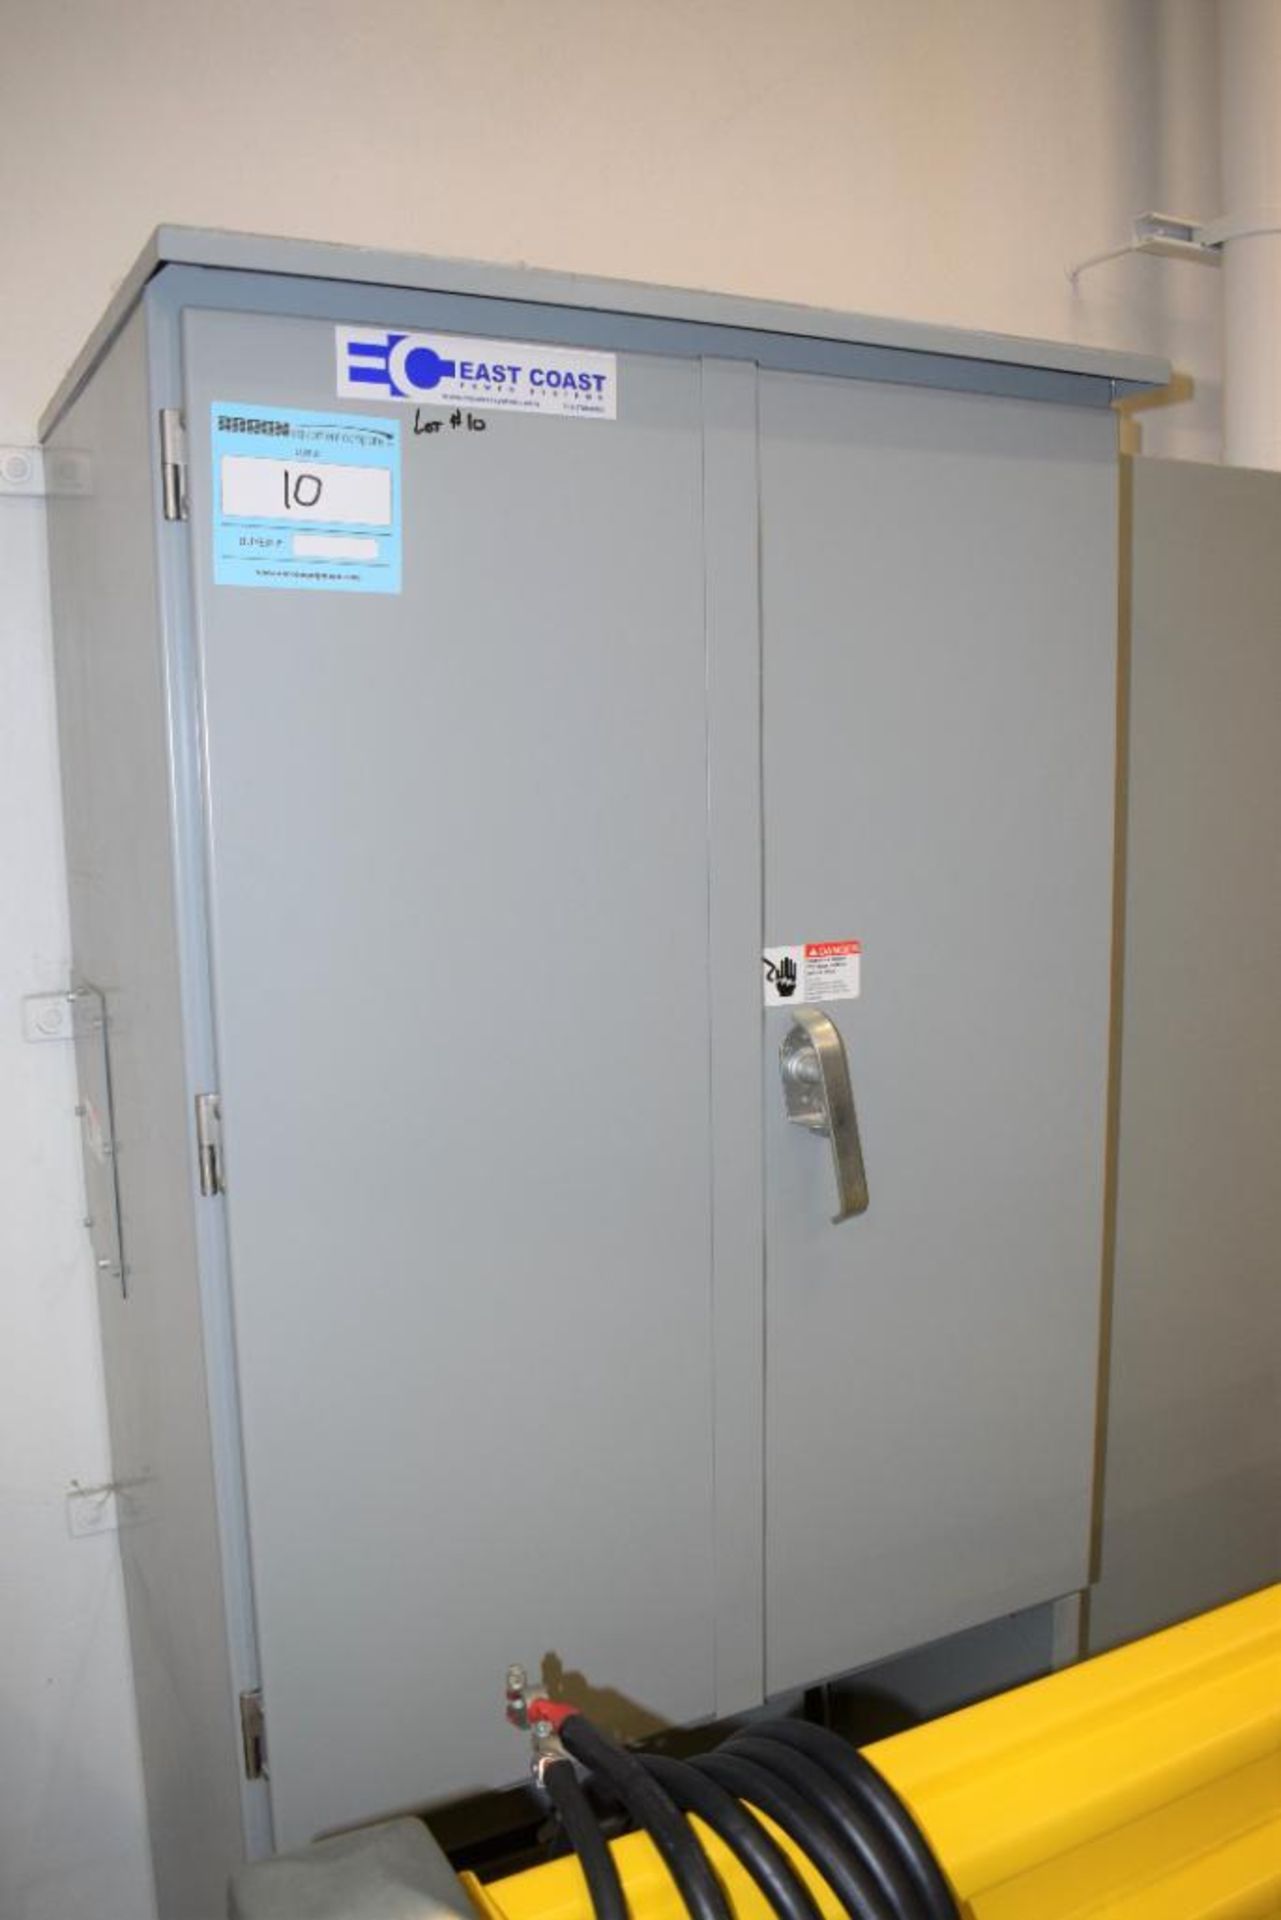 East Coast Panelboard Generator Connection Cabinet, Cat# GCP5-1600S3-2F. Amps 1600A, volts 480/277V, - Image 2 of 6